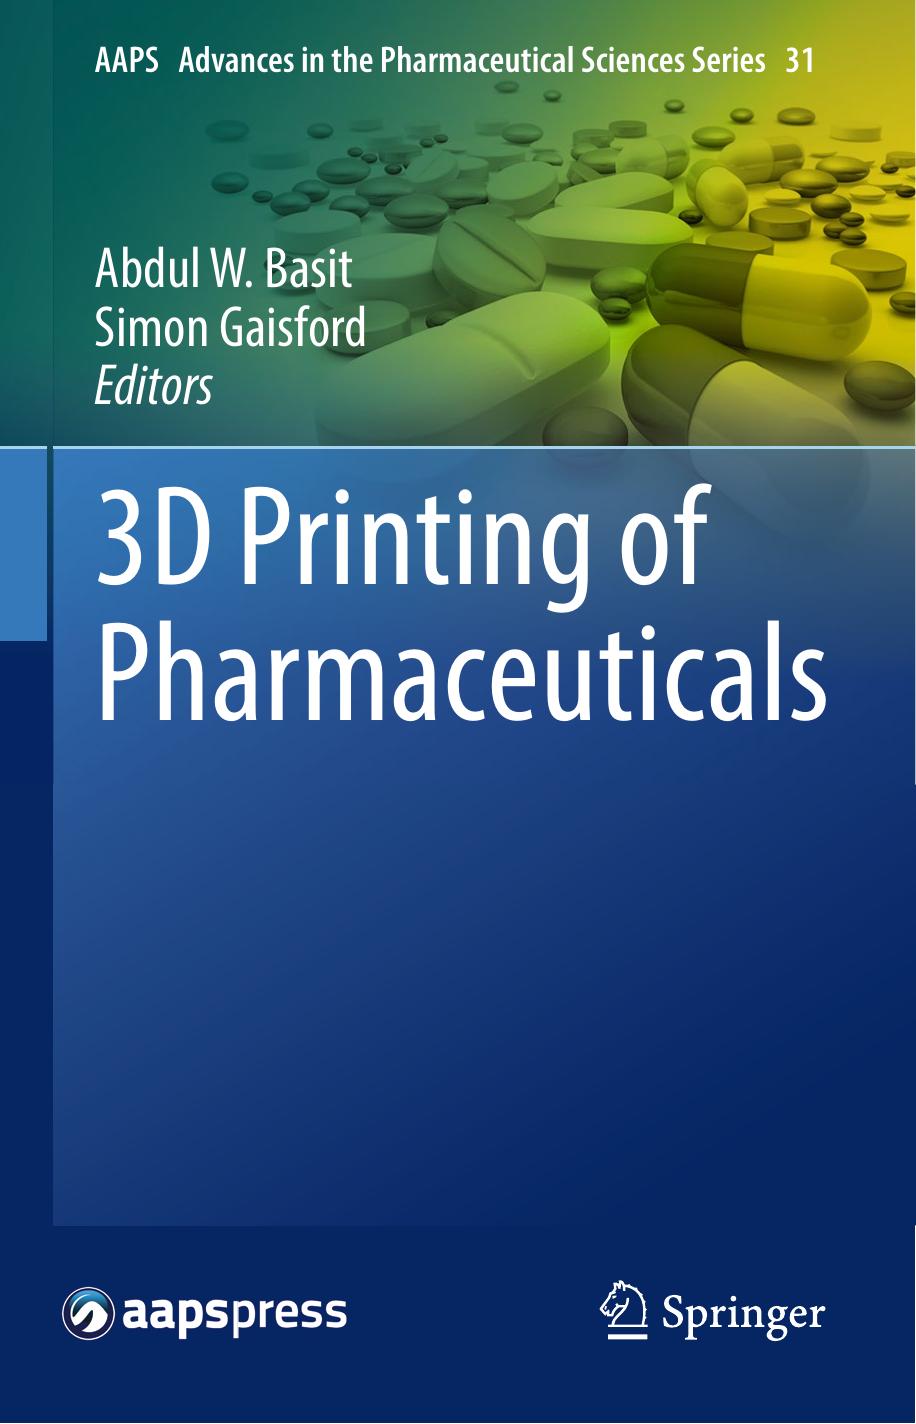 3D Printing of Pharmaceuticals 2018